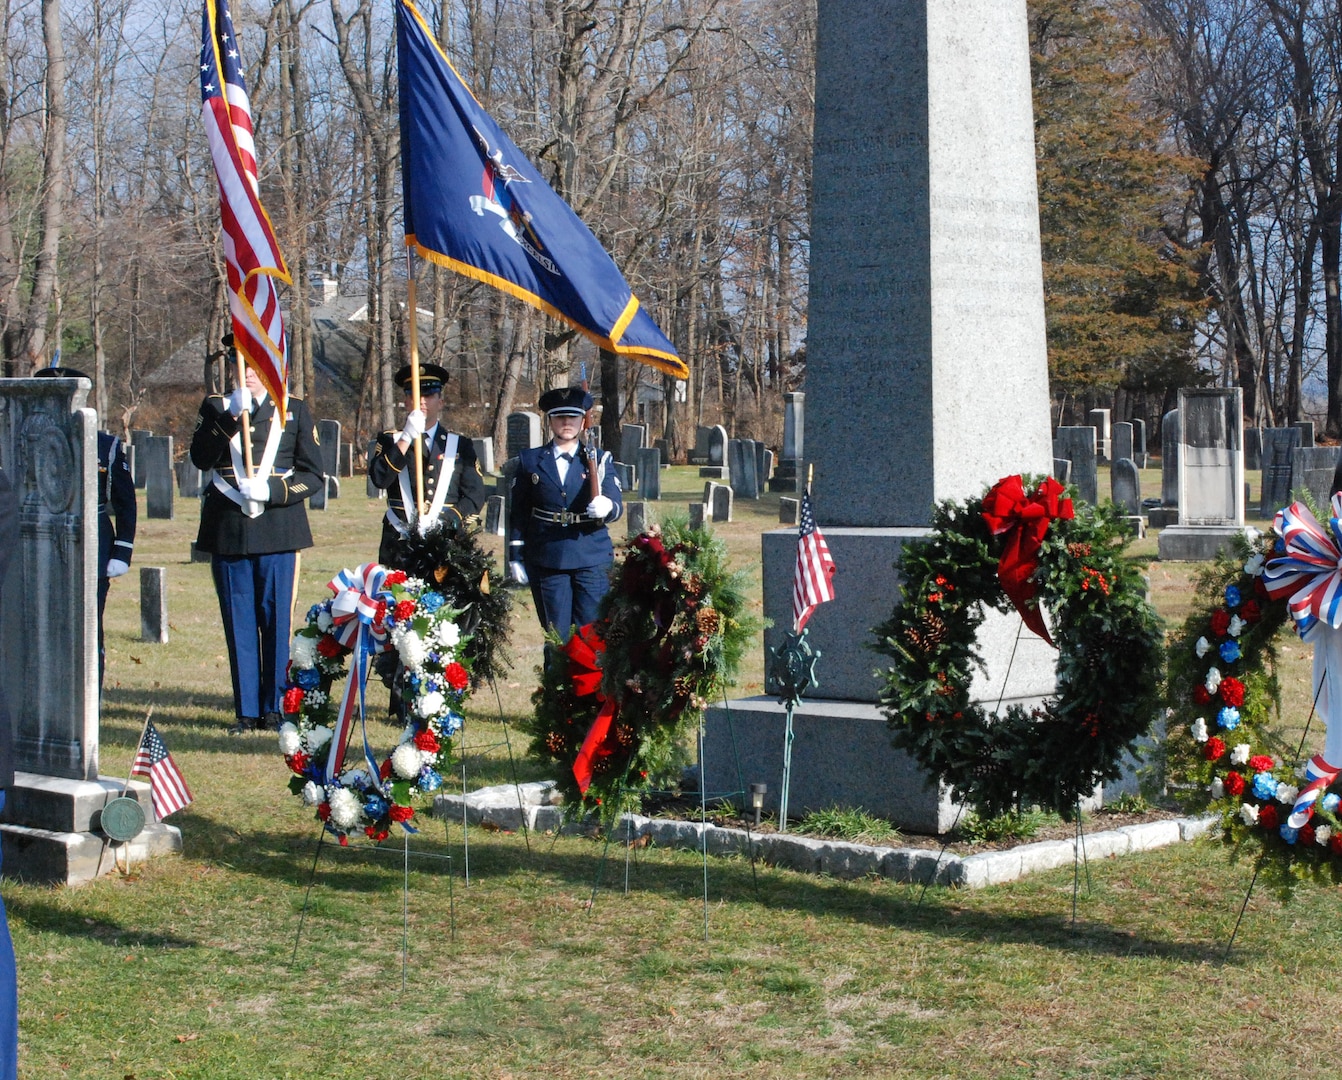 A wreath from President Barack Obama takes pride of place among a number of wreaths placed at the gravesite of President Martin Van Buren at the Dutch Reformed Cemetery in Kinderhook, New York, during a ceremony honoring the eighth president on Dec. 5, 2015, the 233rd anniversary of his birth. 